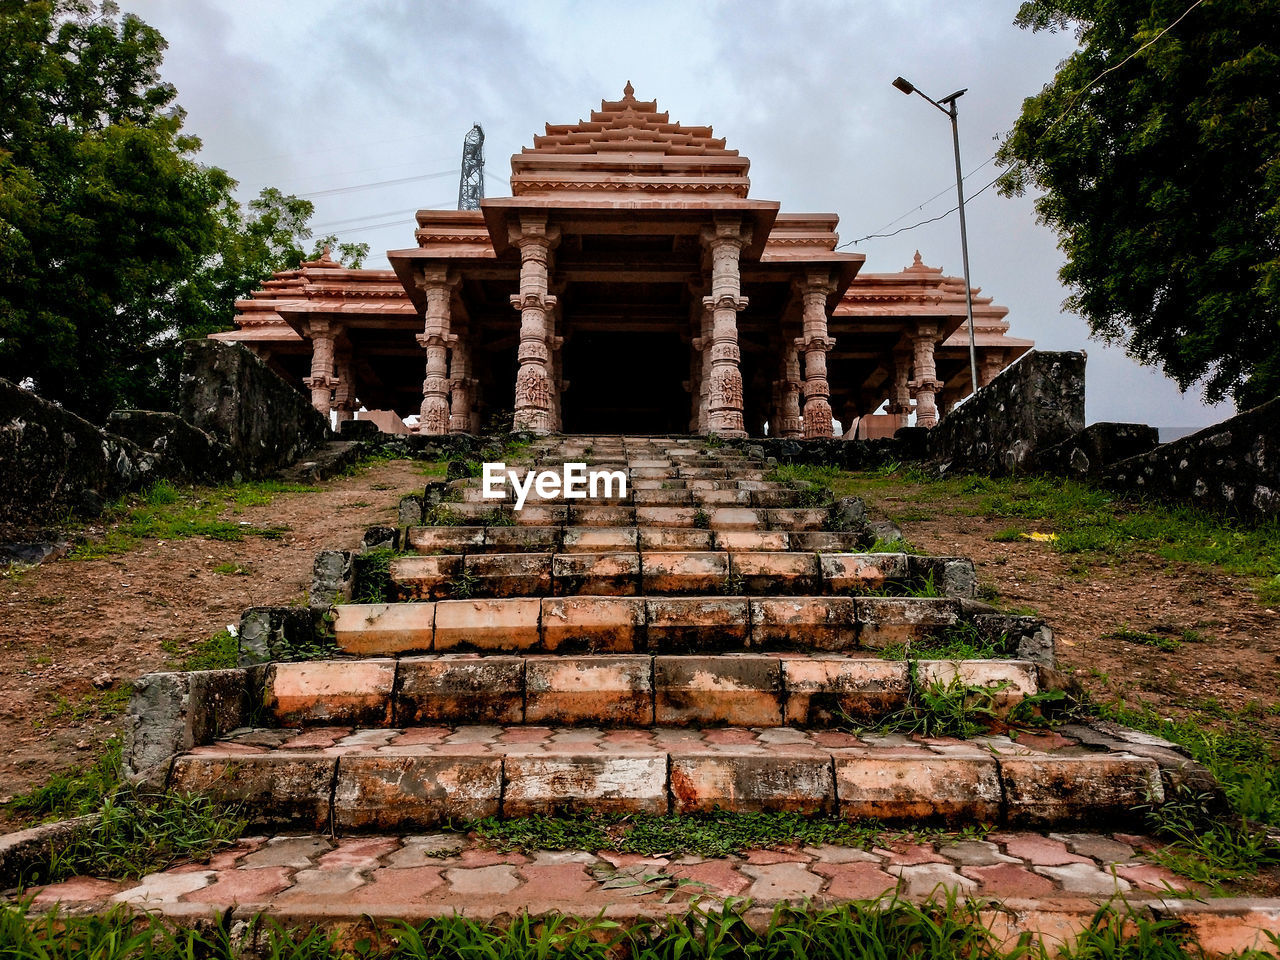 VIEW OF OLD TEMPLE